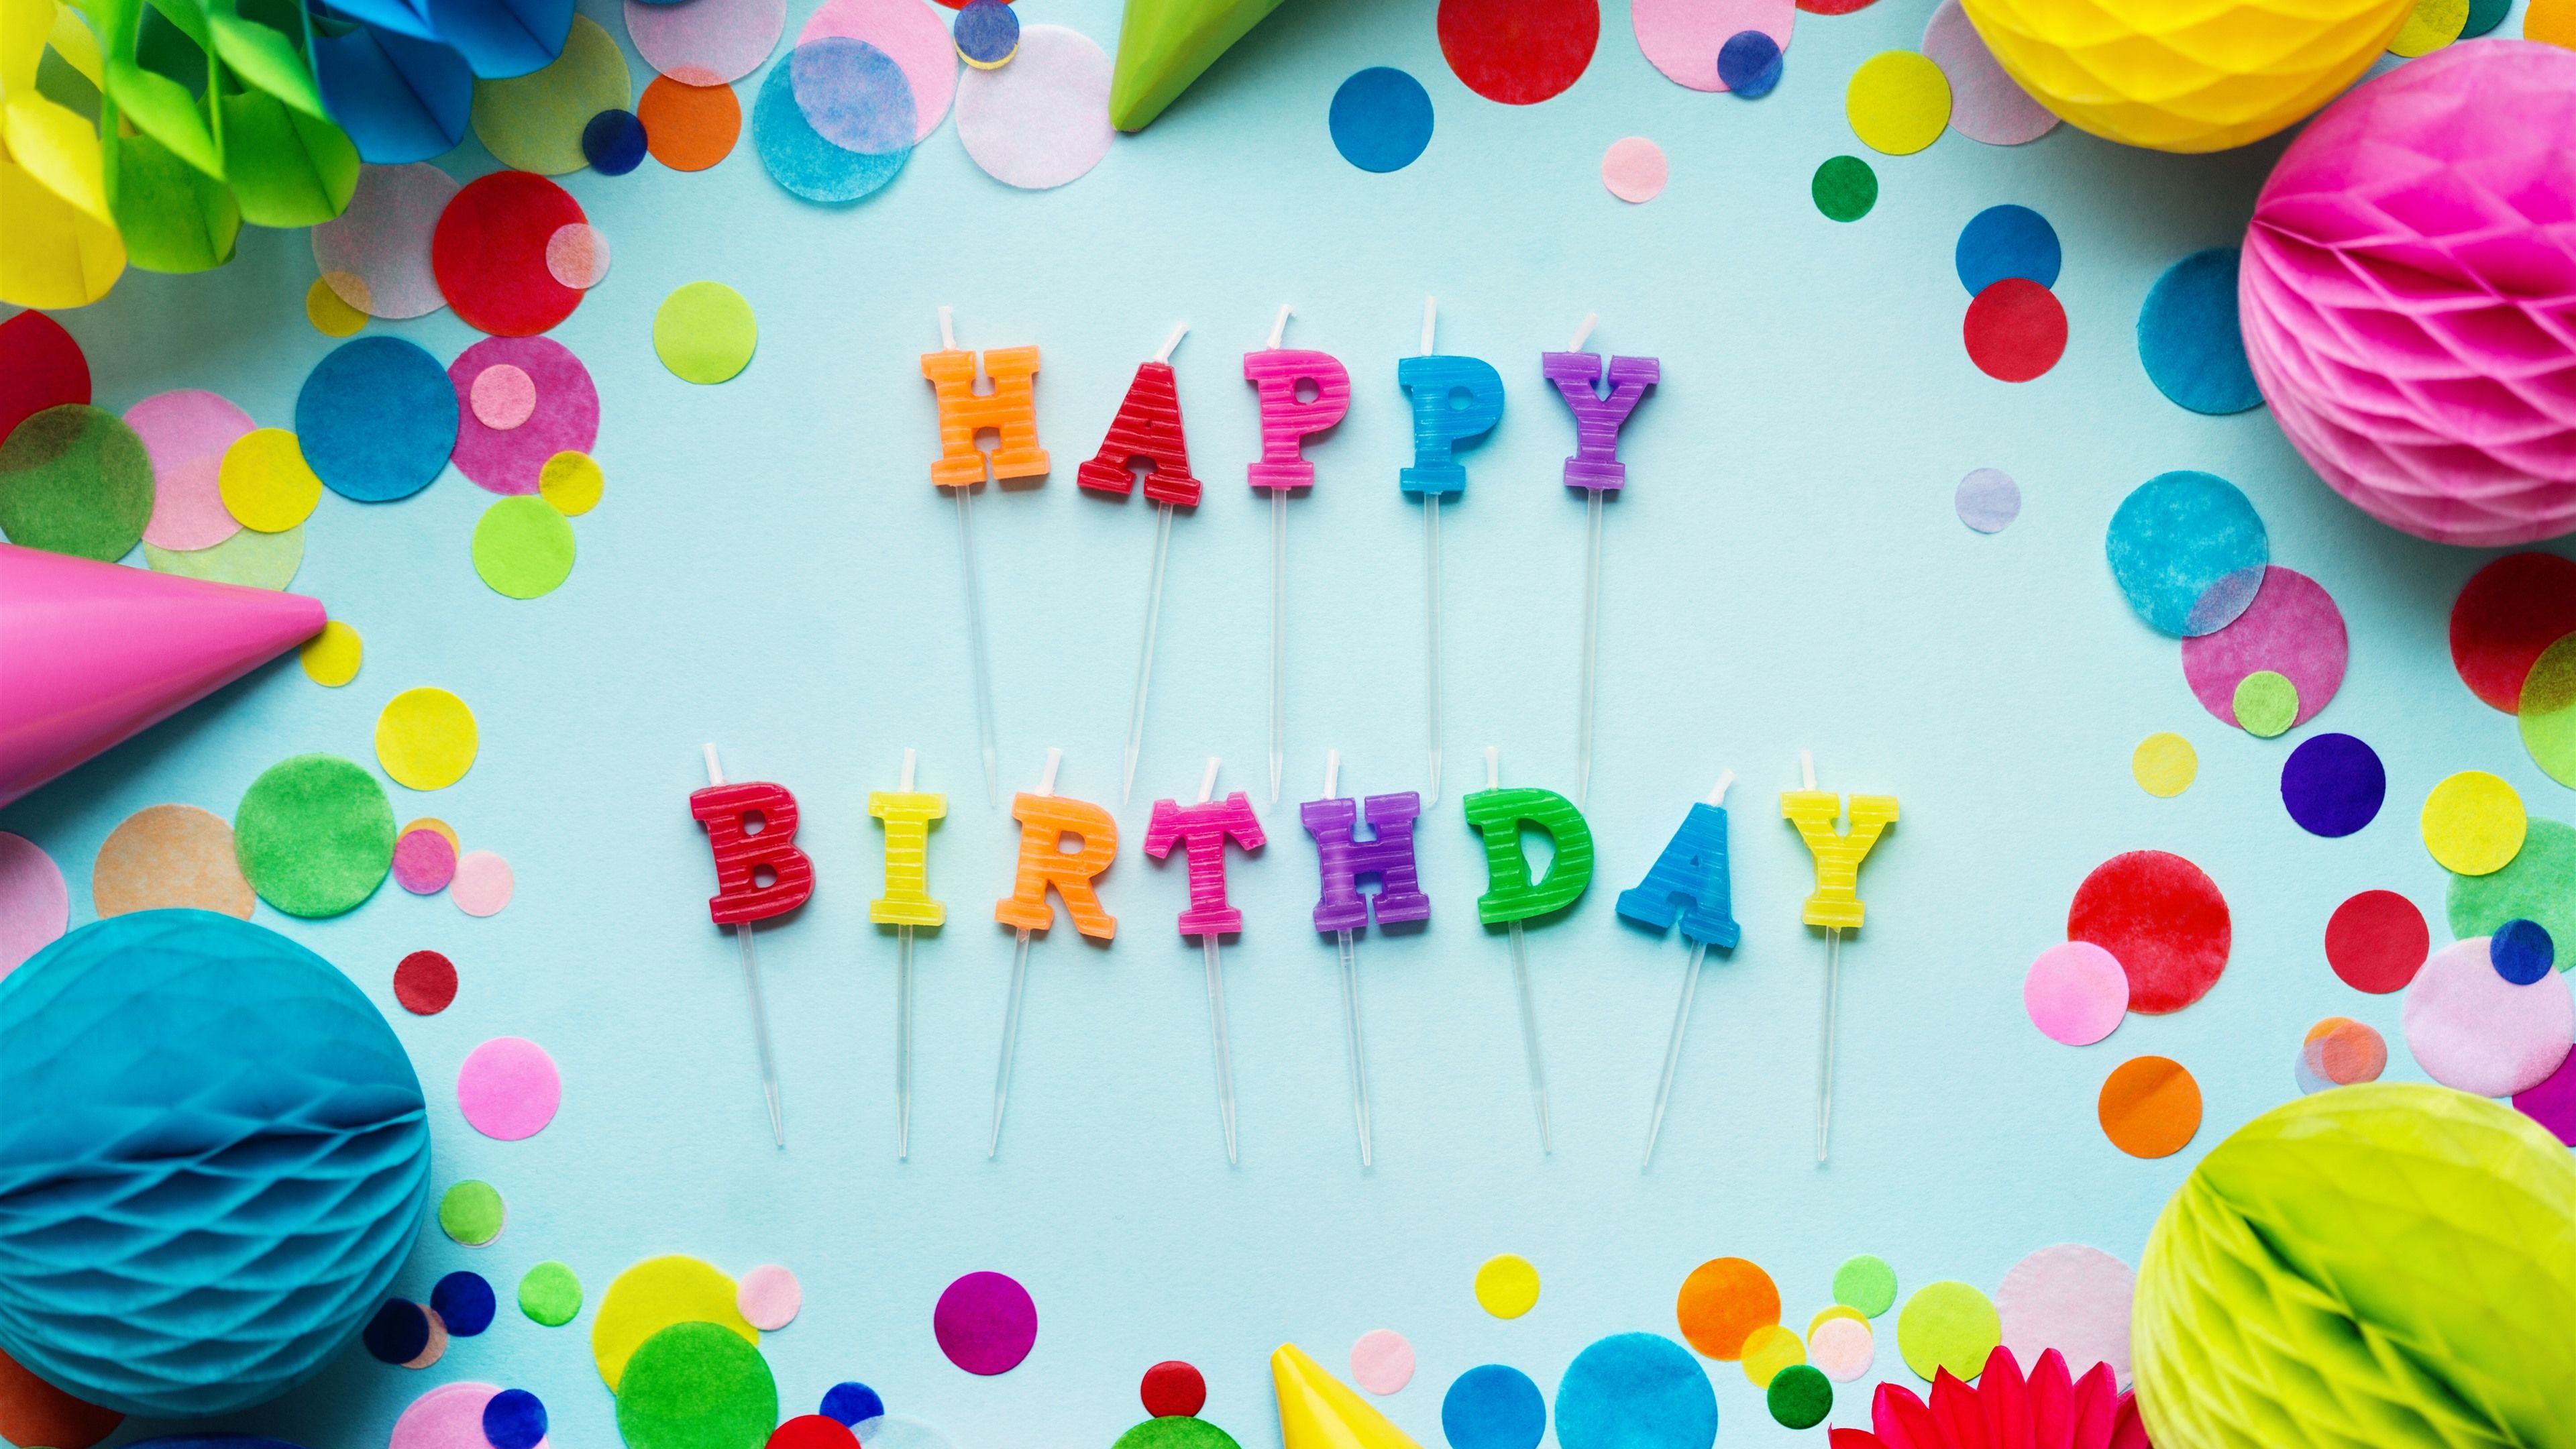 Wallpaper Happy Birthday, colorful decorations 7680x4320 UHD 8K Picture, Image